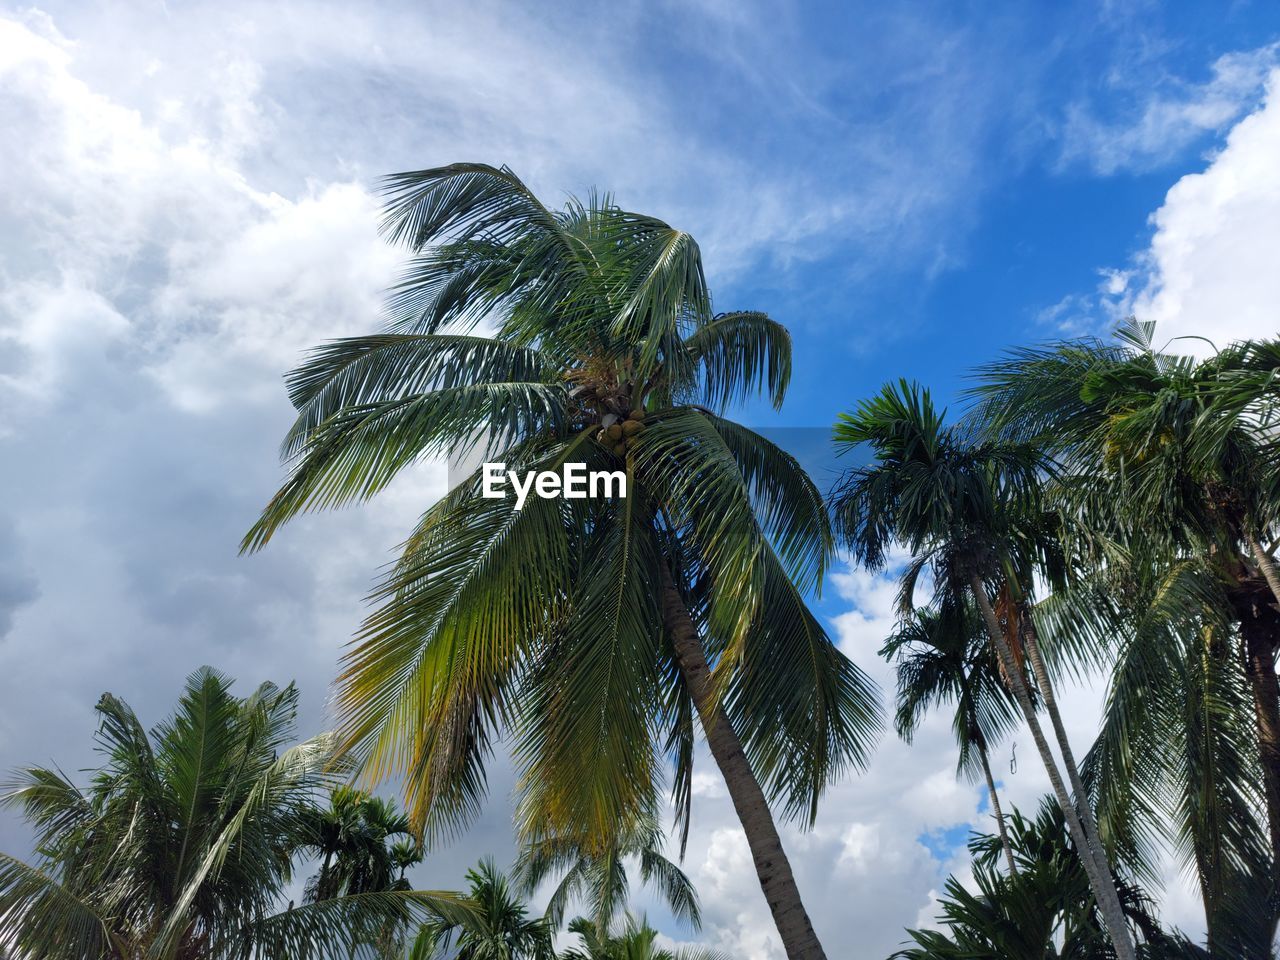 tree, tropical climate, palm tree, sky, plant, cloud, tropics, nature, coconut palm tree, tropical tree, beauty in nature, low angle view, leaf, palm leaf, growth, borassus flabellifer, travel destinations, environment, no people, tranquility, scenics - nature, travel, outdoors, blue, land, jungle, idyllic, vacation, trip, tourism, coconut, green, island, cloudscape, tree trunk, day, plant part, sunlight, trunk, wind, water, holiday, vegetation, flower, sea, tropical rainforest, directly below